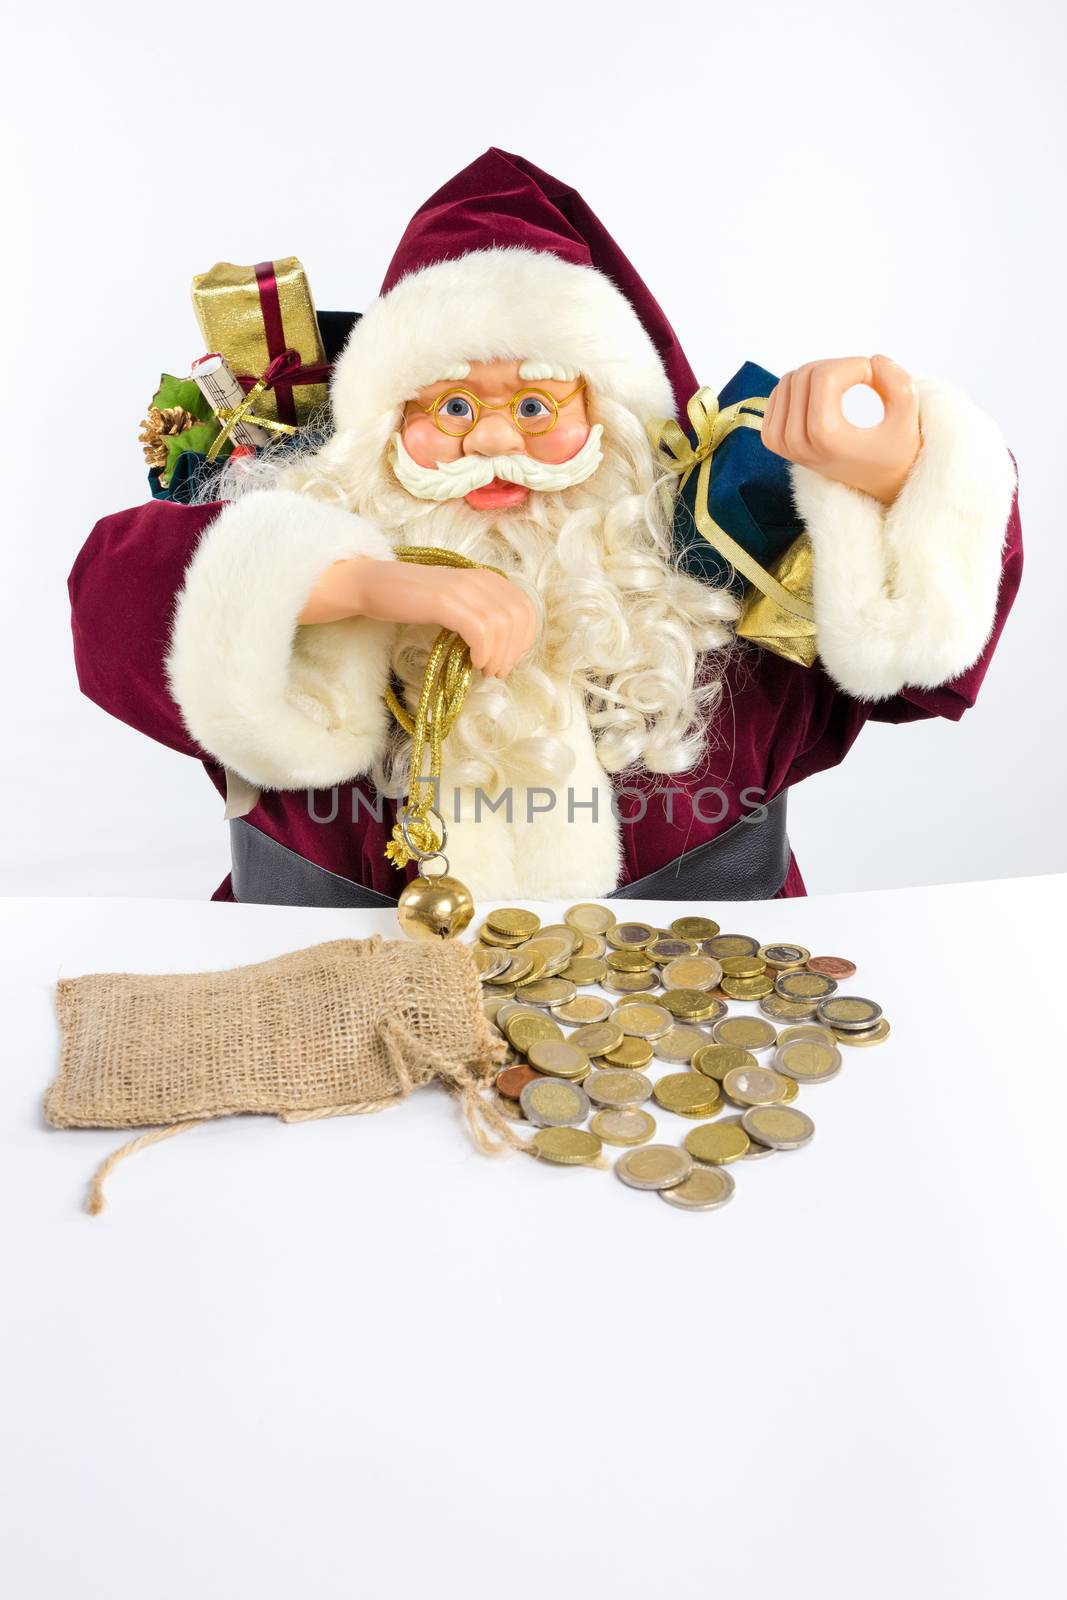 Santa Claus ringing bell with presents and money coins isolated on white background